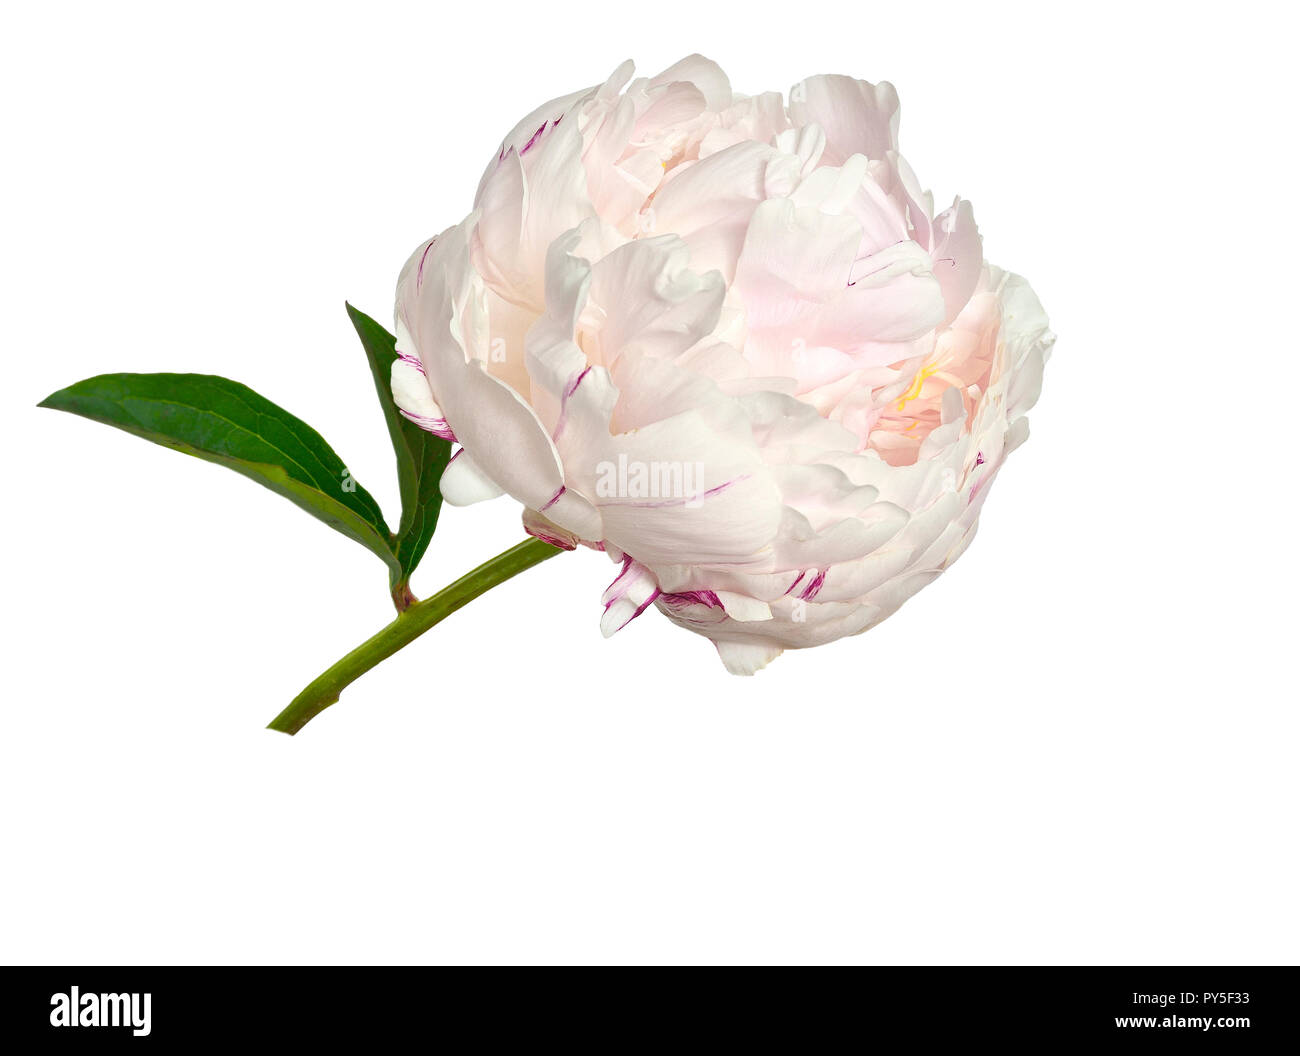 Gentle pink with creamy peony flower with fluffy, frilly petals close up, isolated on white background. Romantic floral pattern Stock Photo